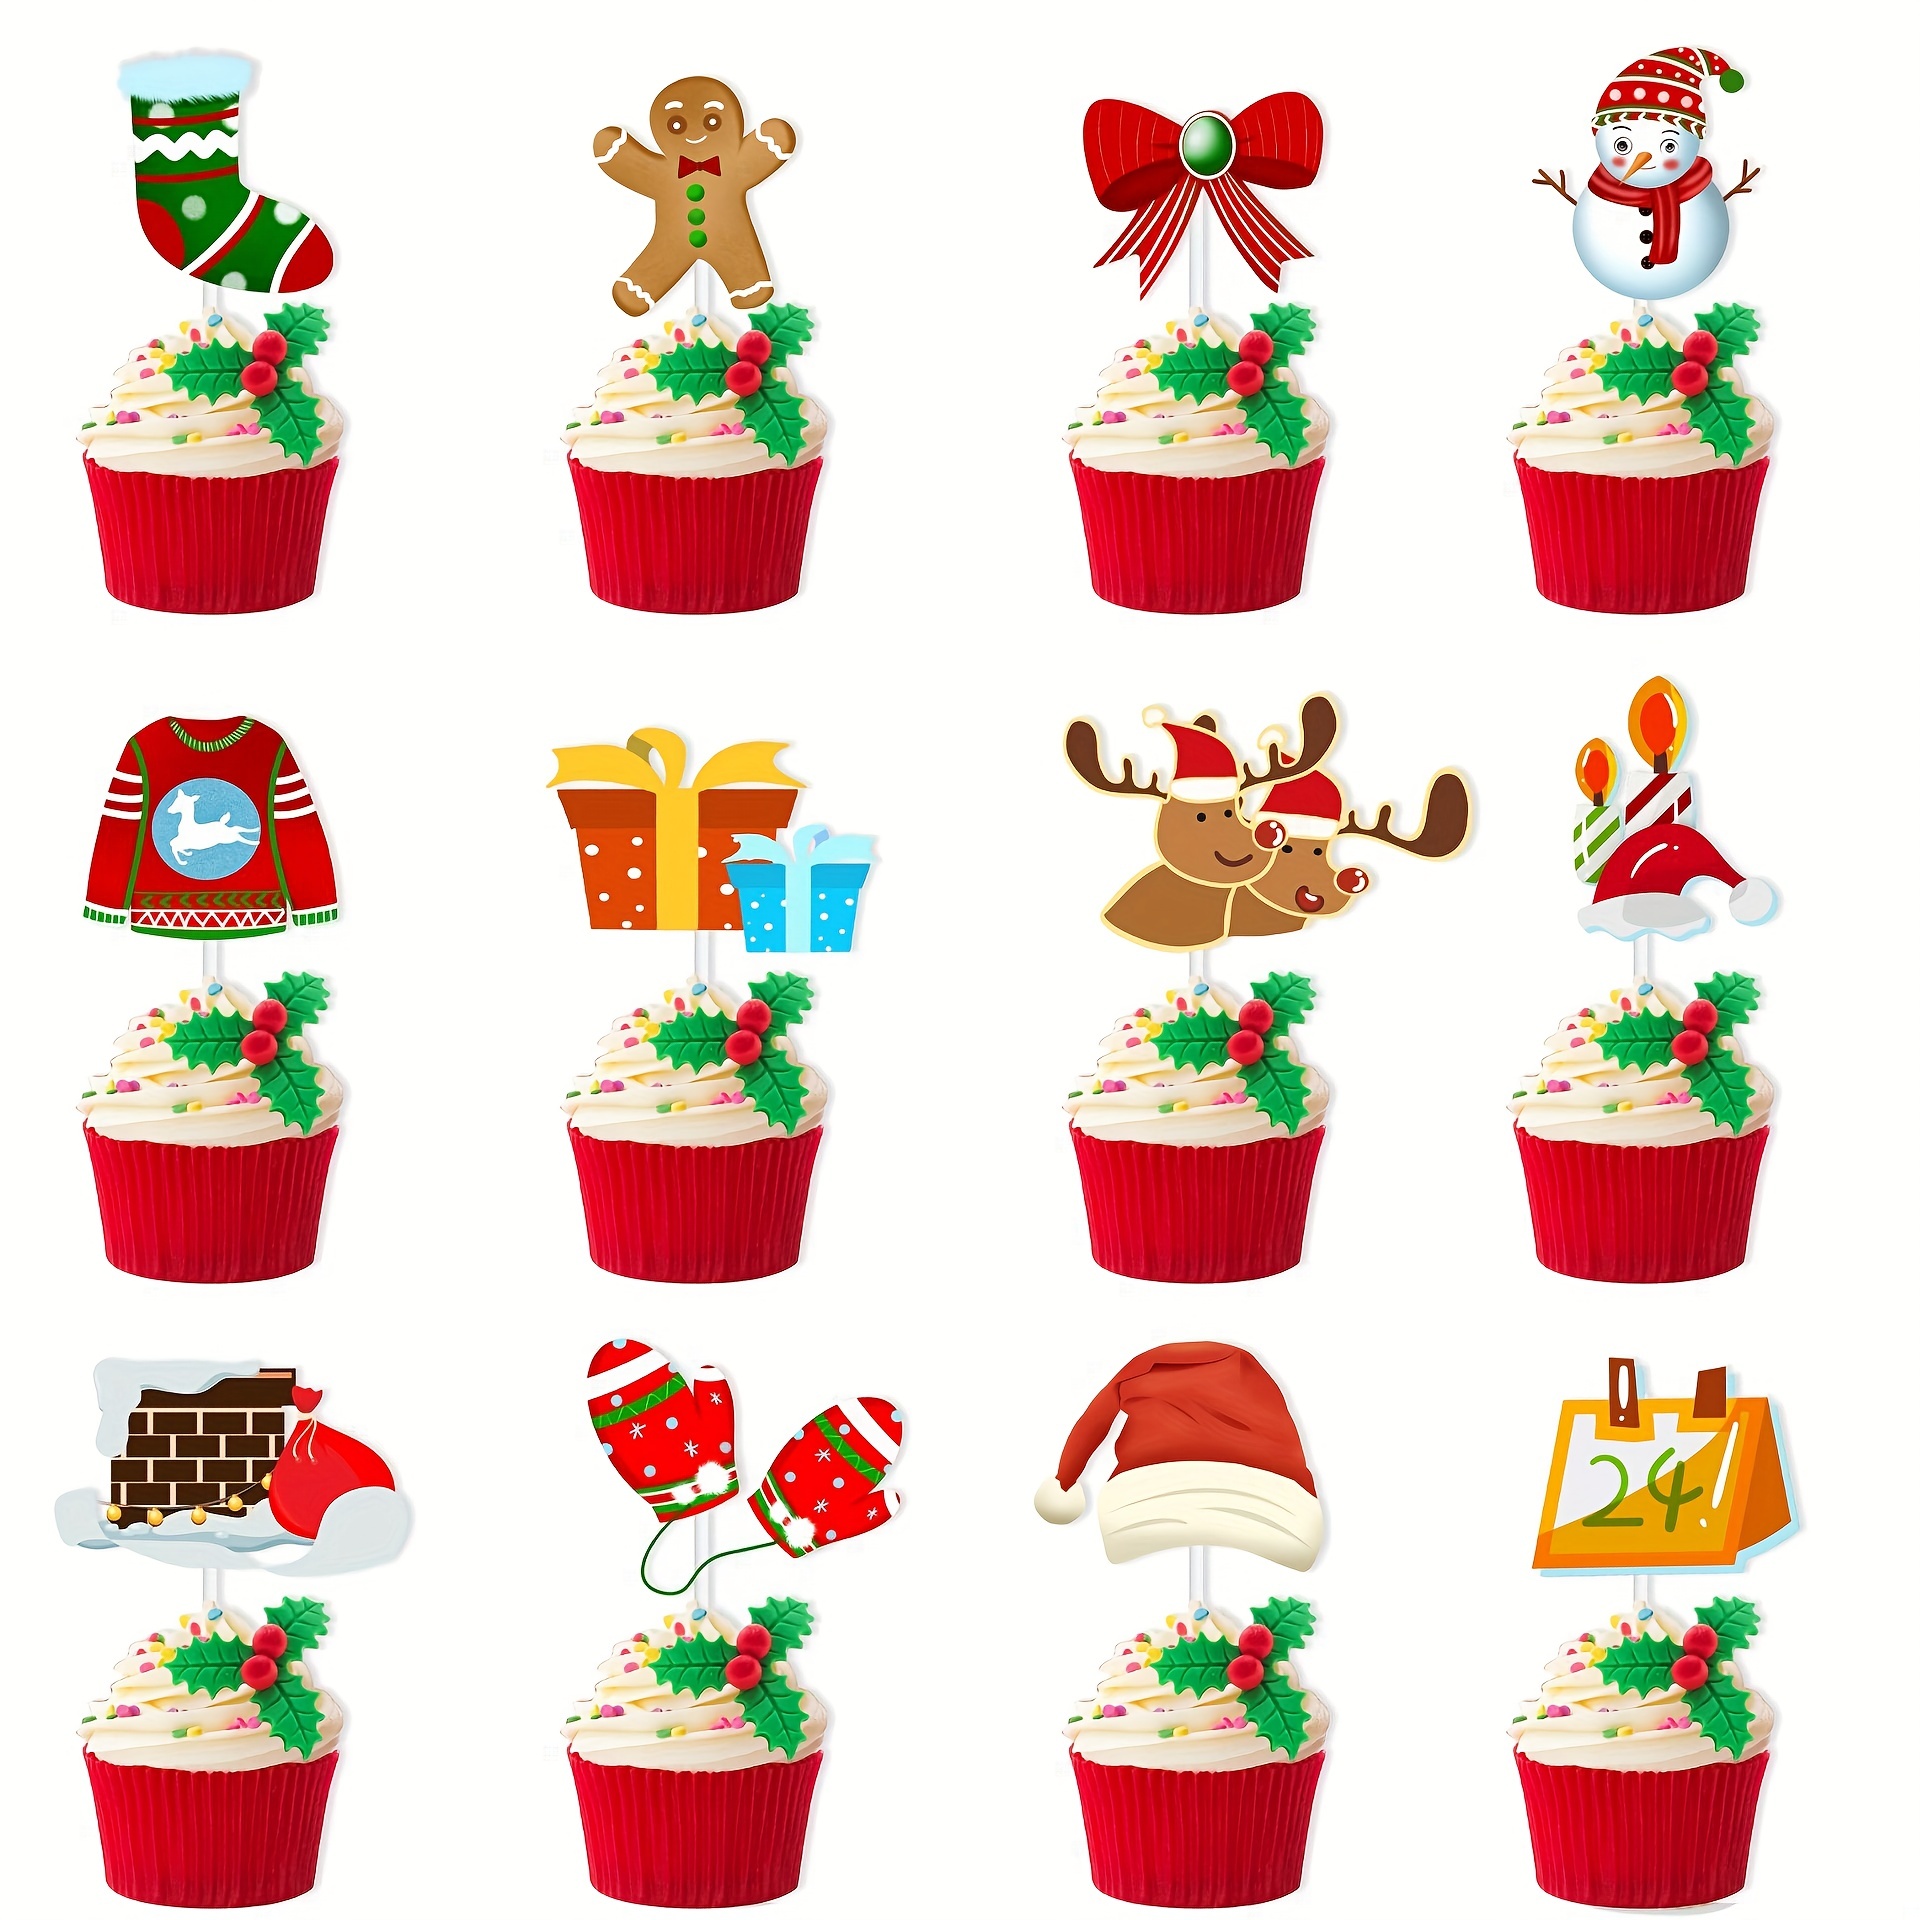 Christmas Baking Supplies & Party Decorations